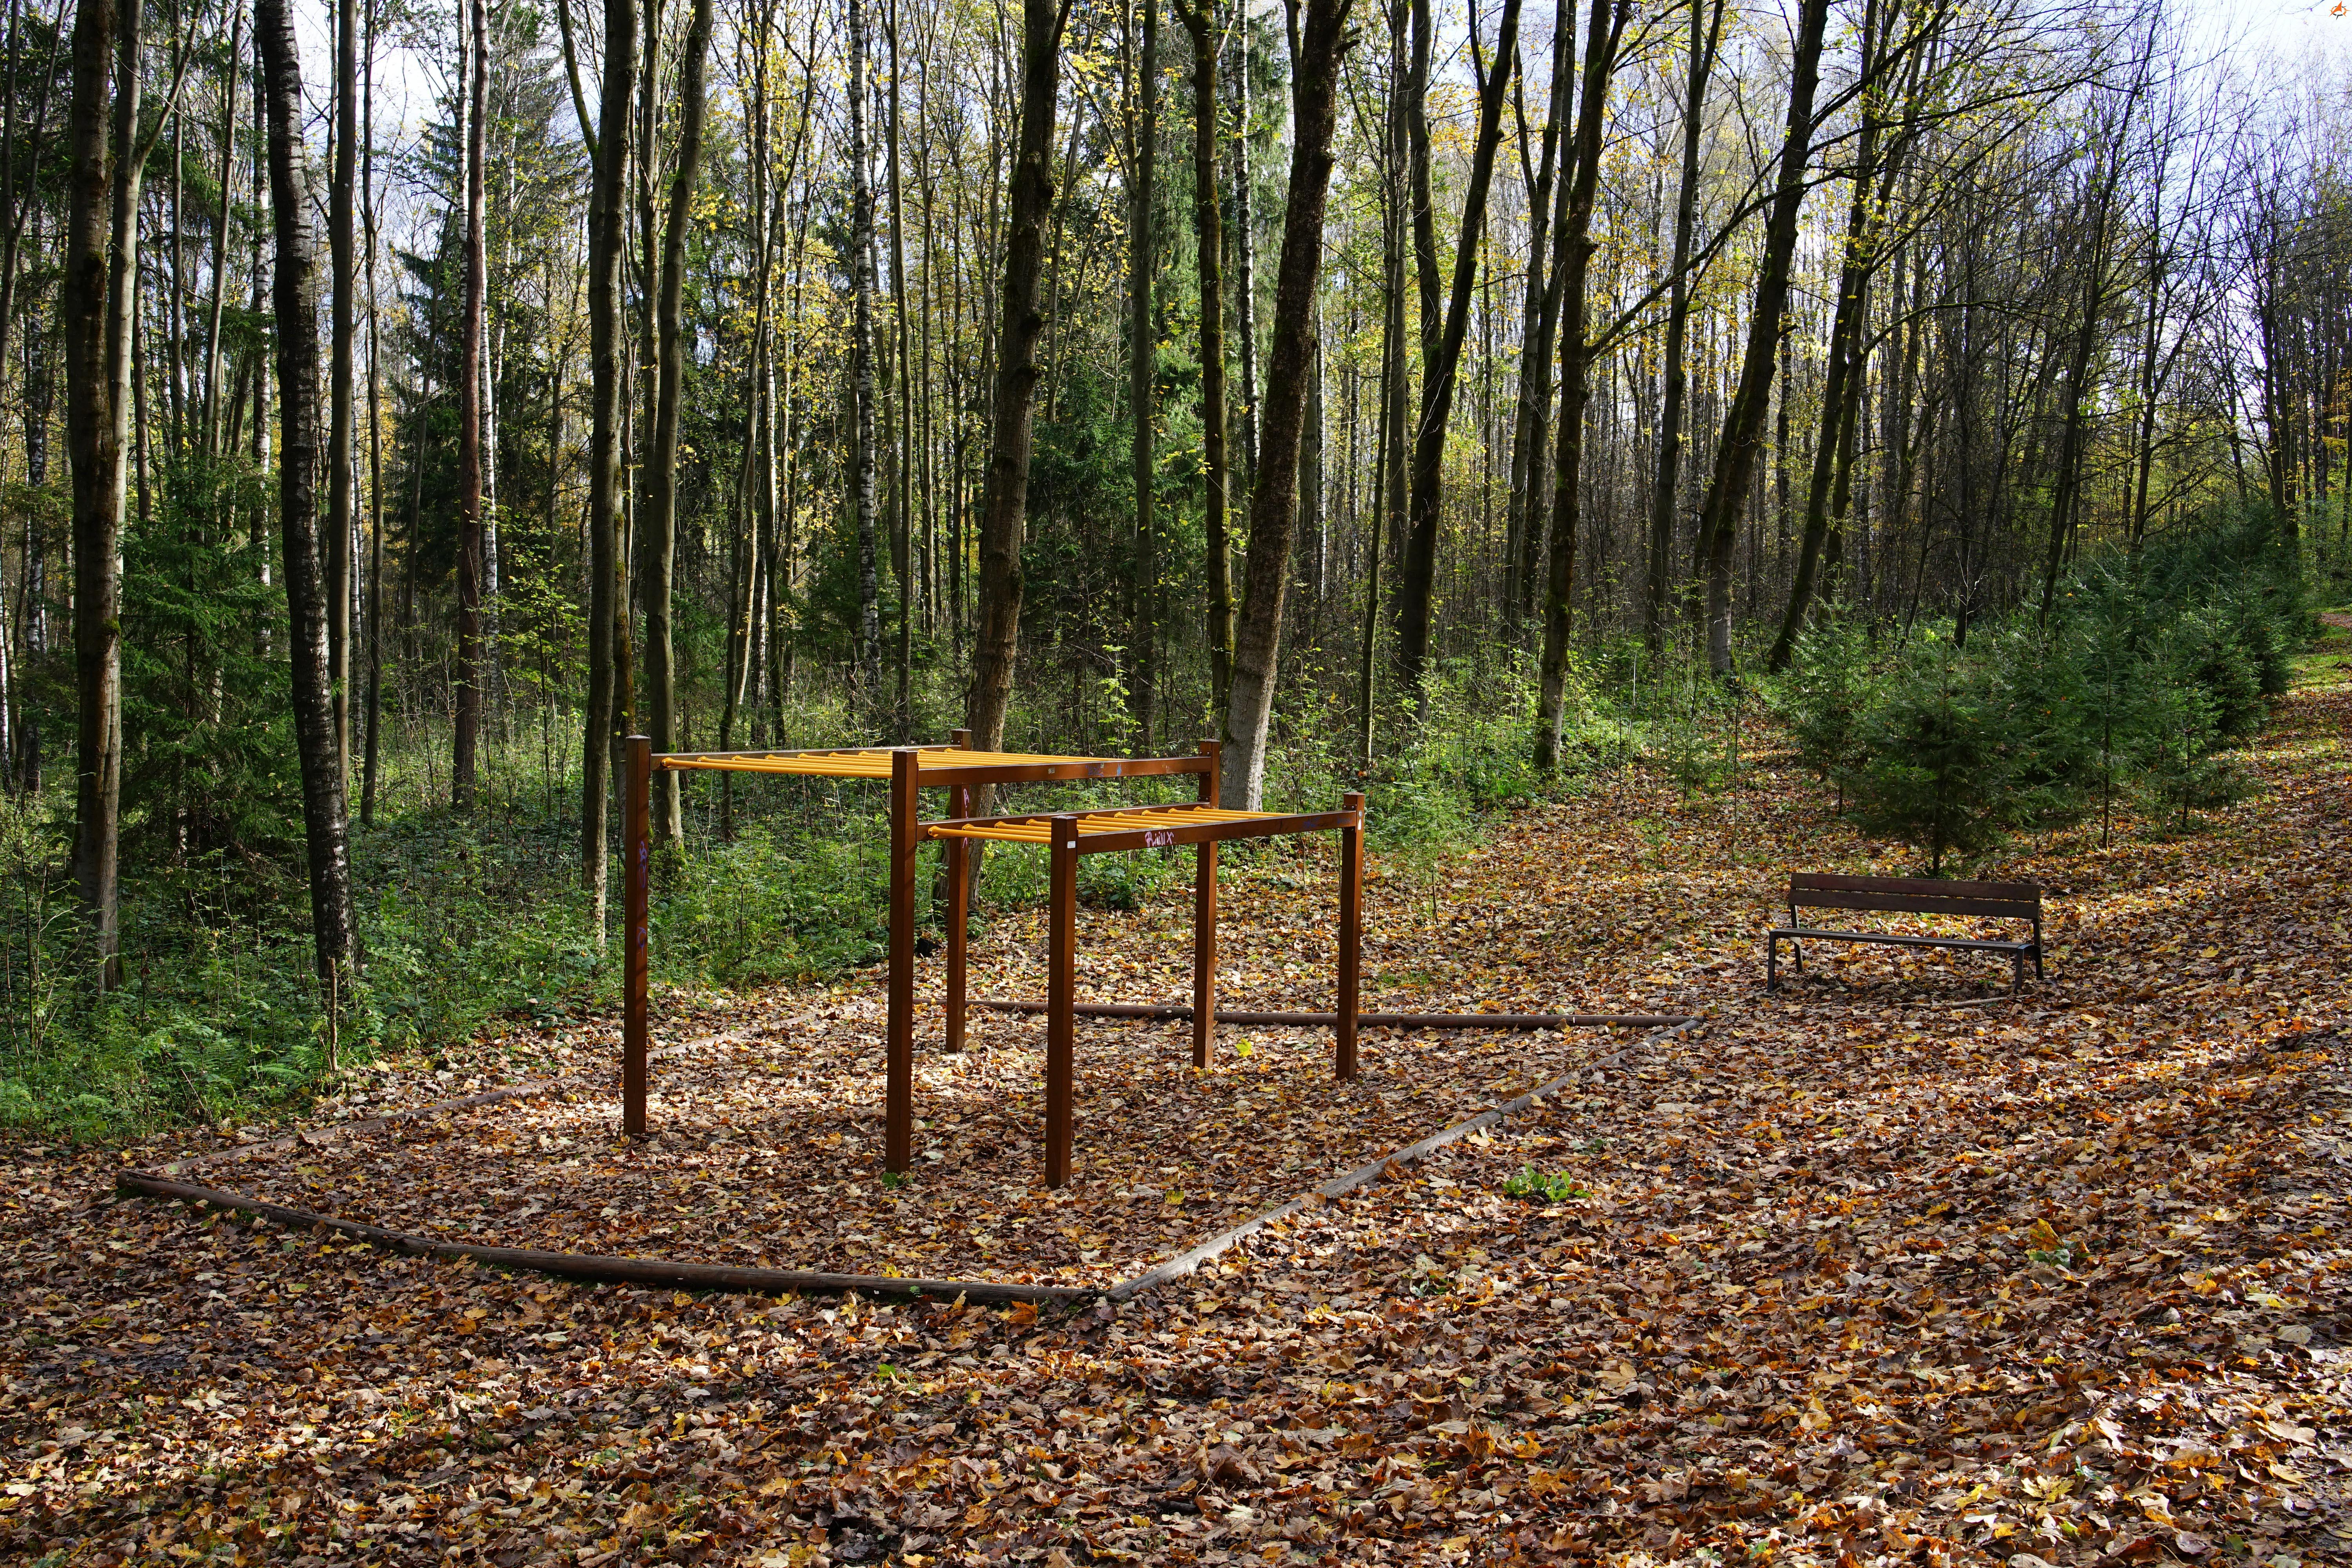 The path across the forest park is complemented by several wooden sports instruments in a non-disturbing environment.